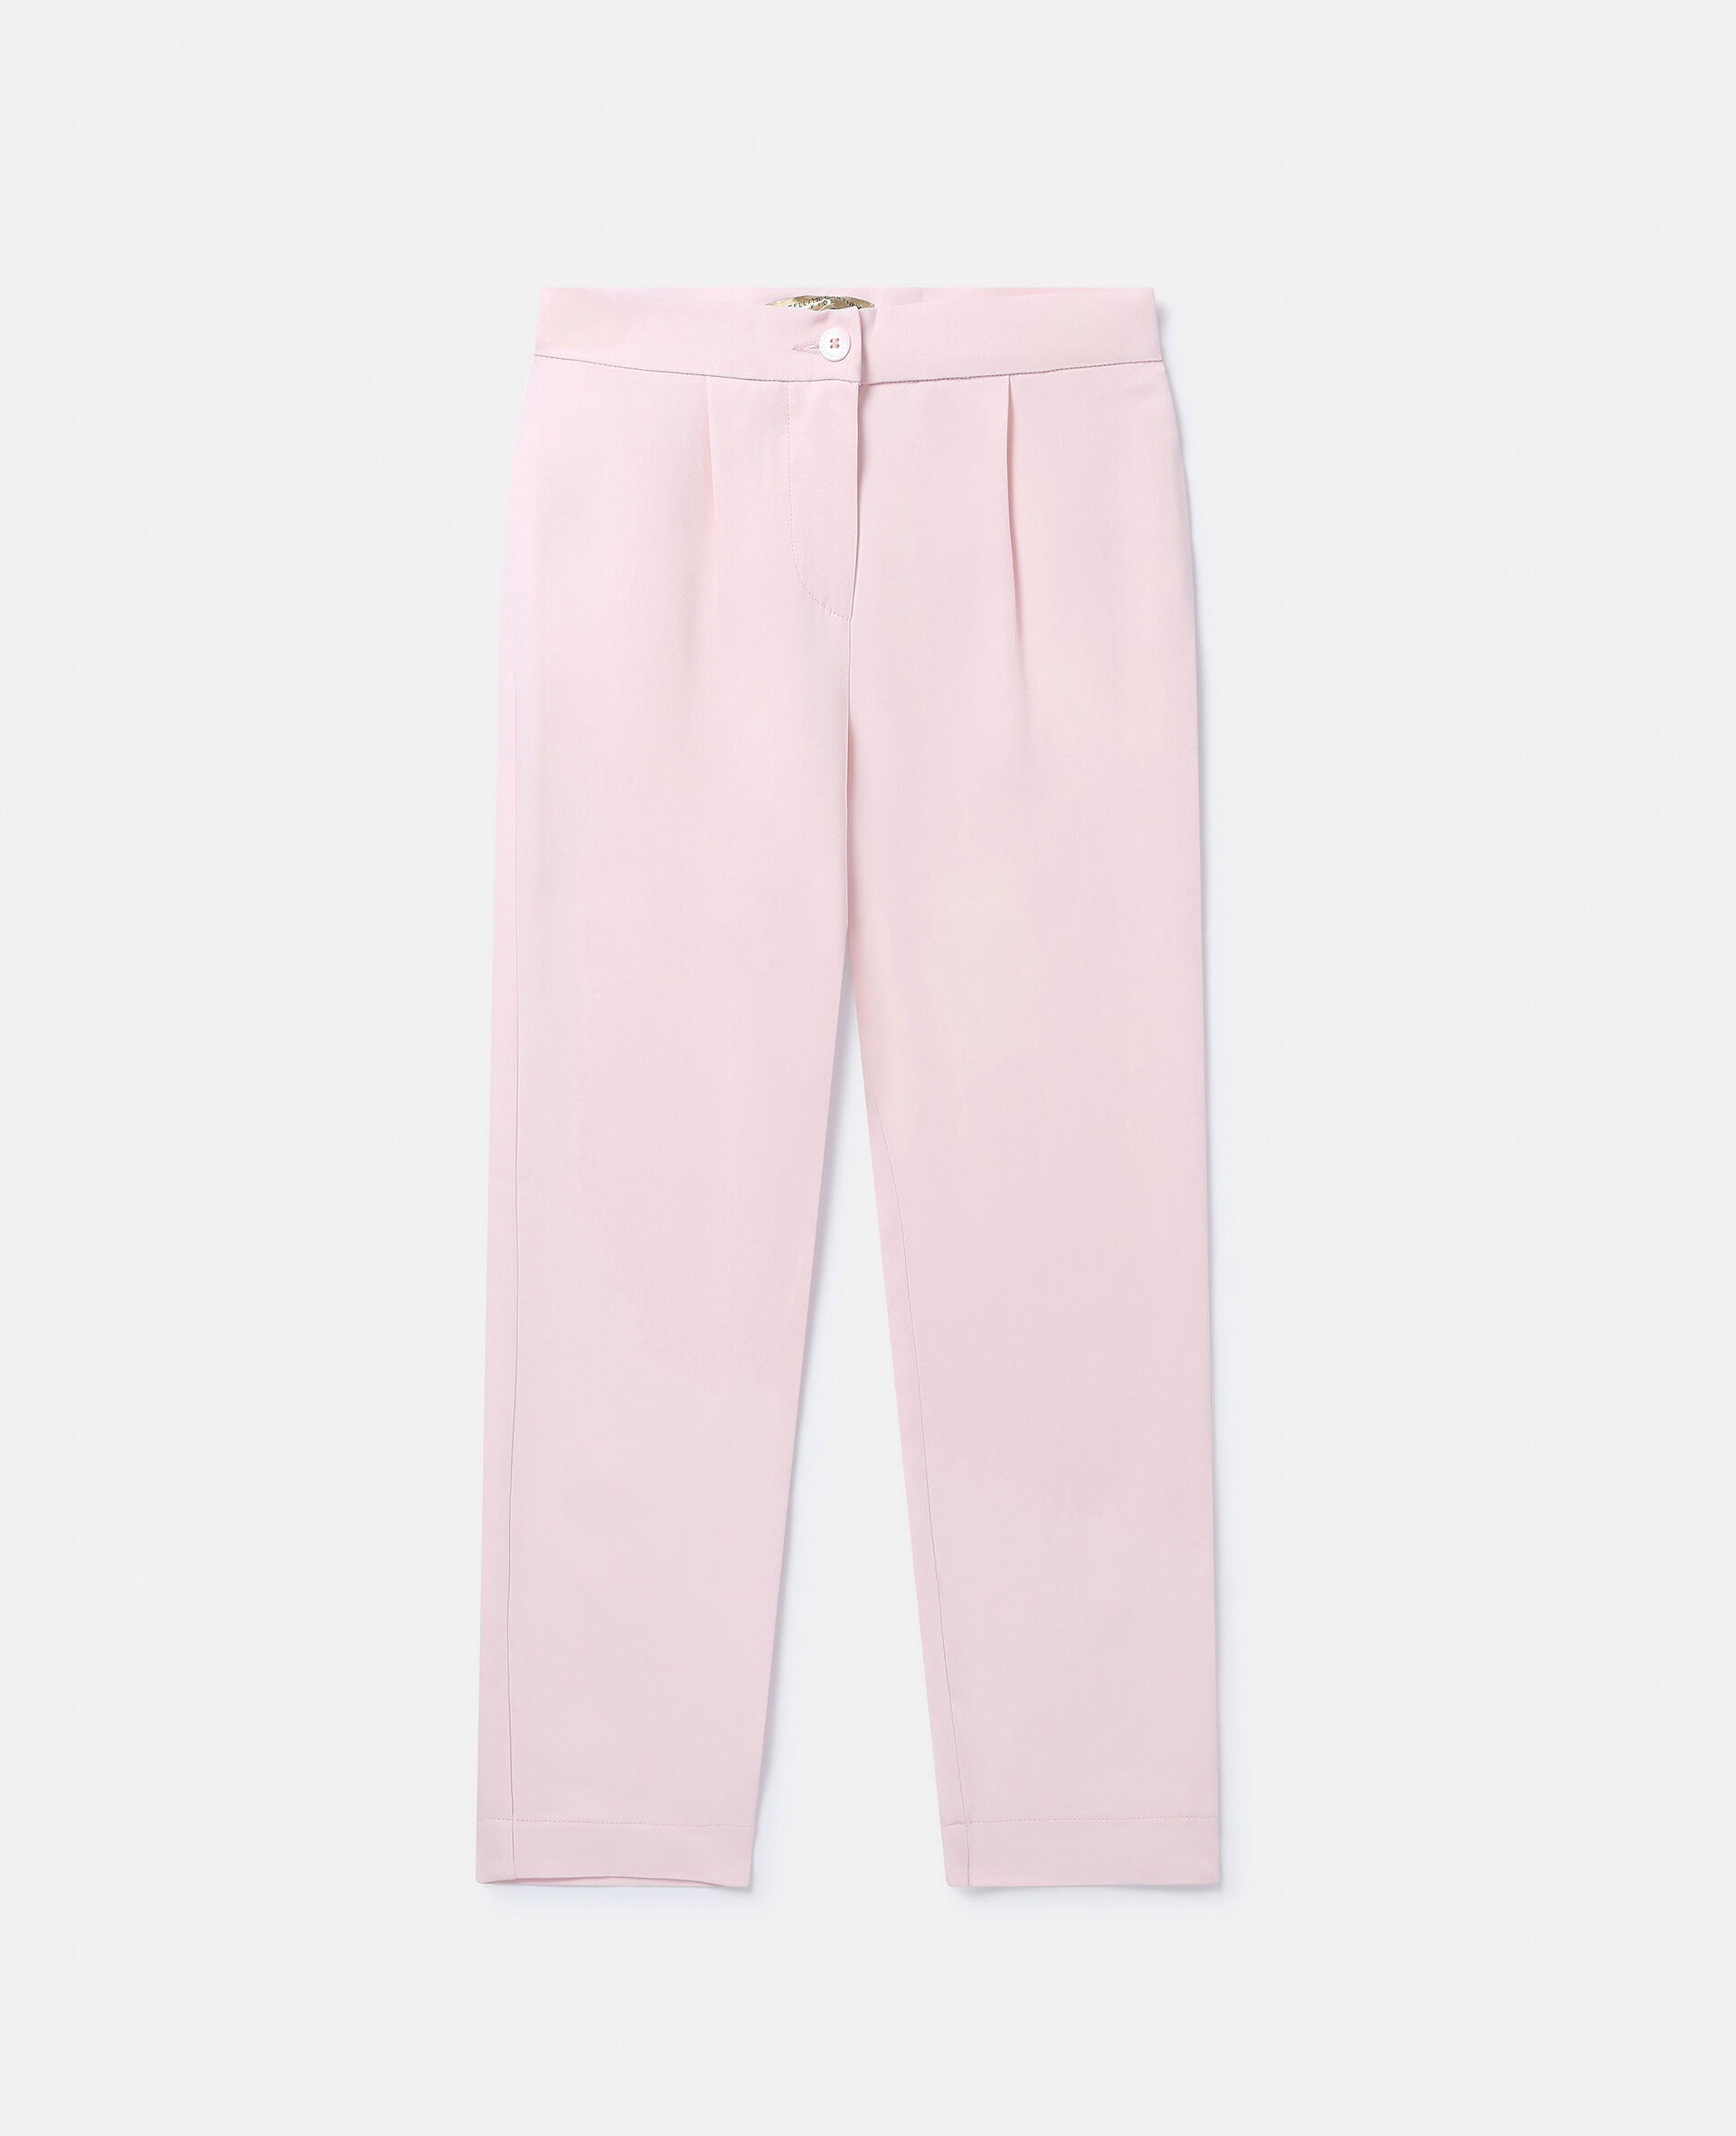 Pleat Front Tailored Trousers-Pink-large image number 0